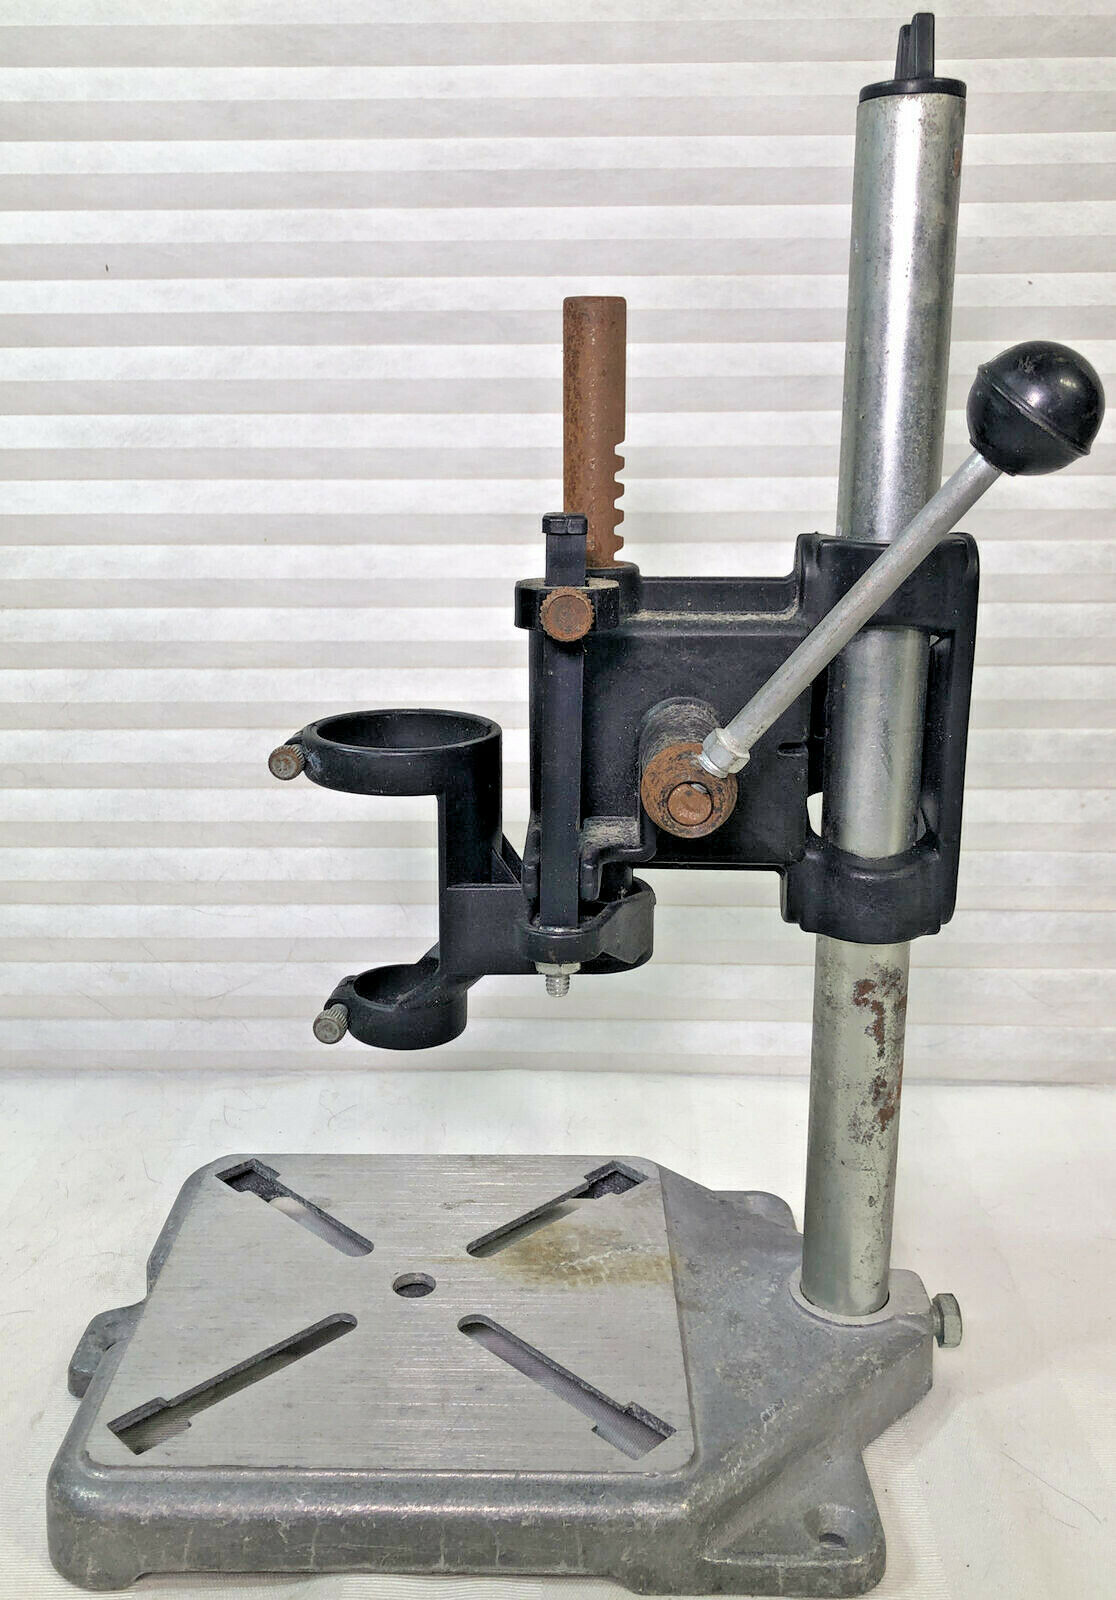 Dremel Deluxe Drill Press Stand - similar items